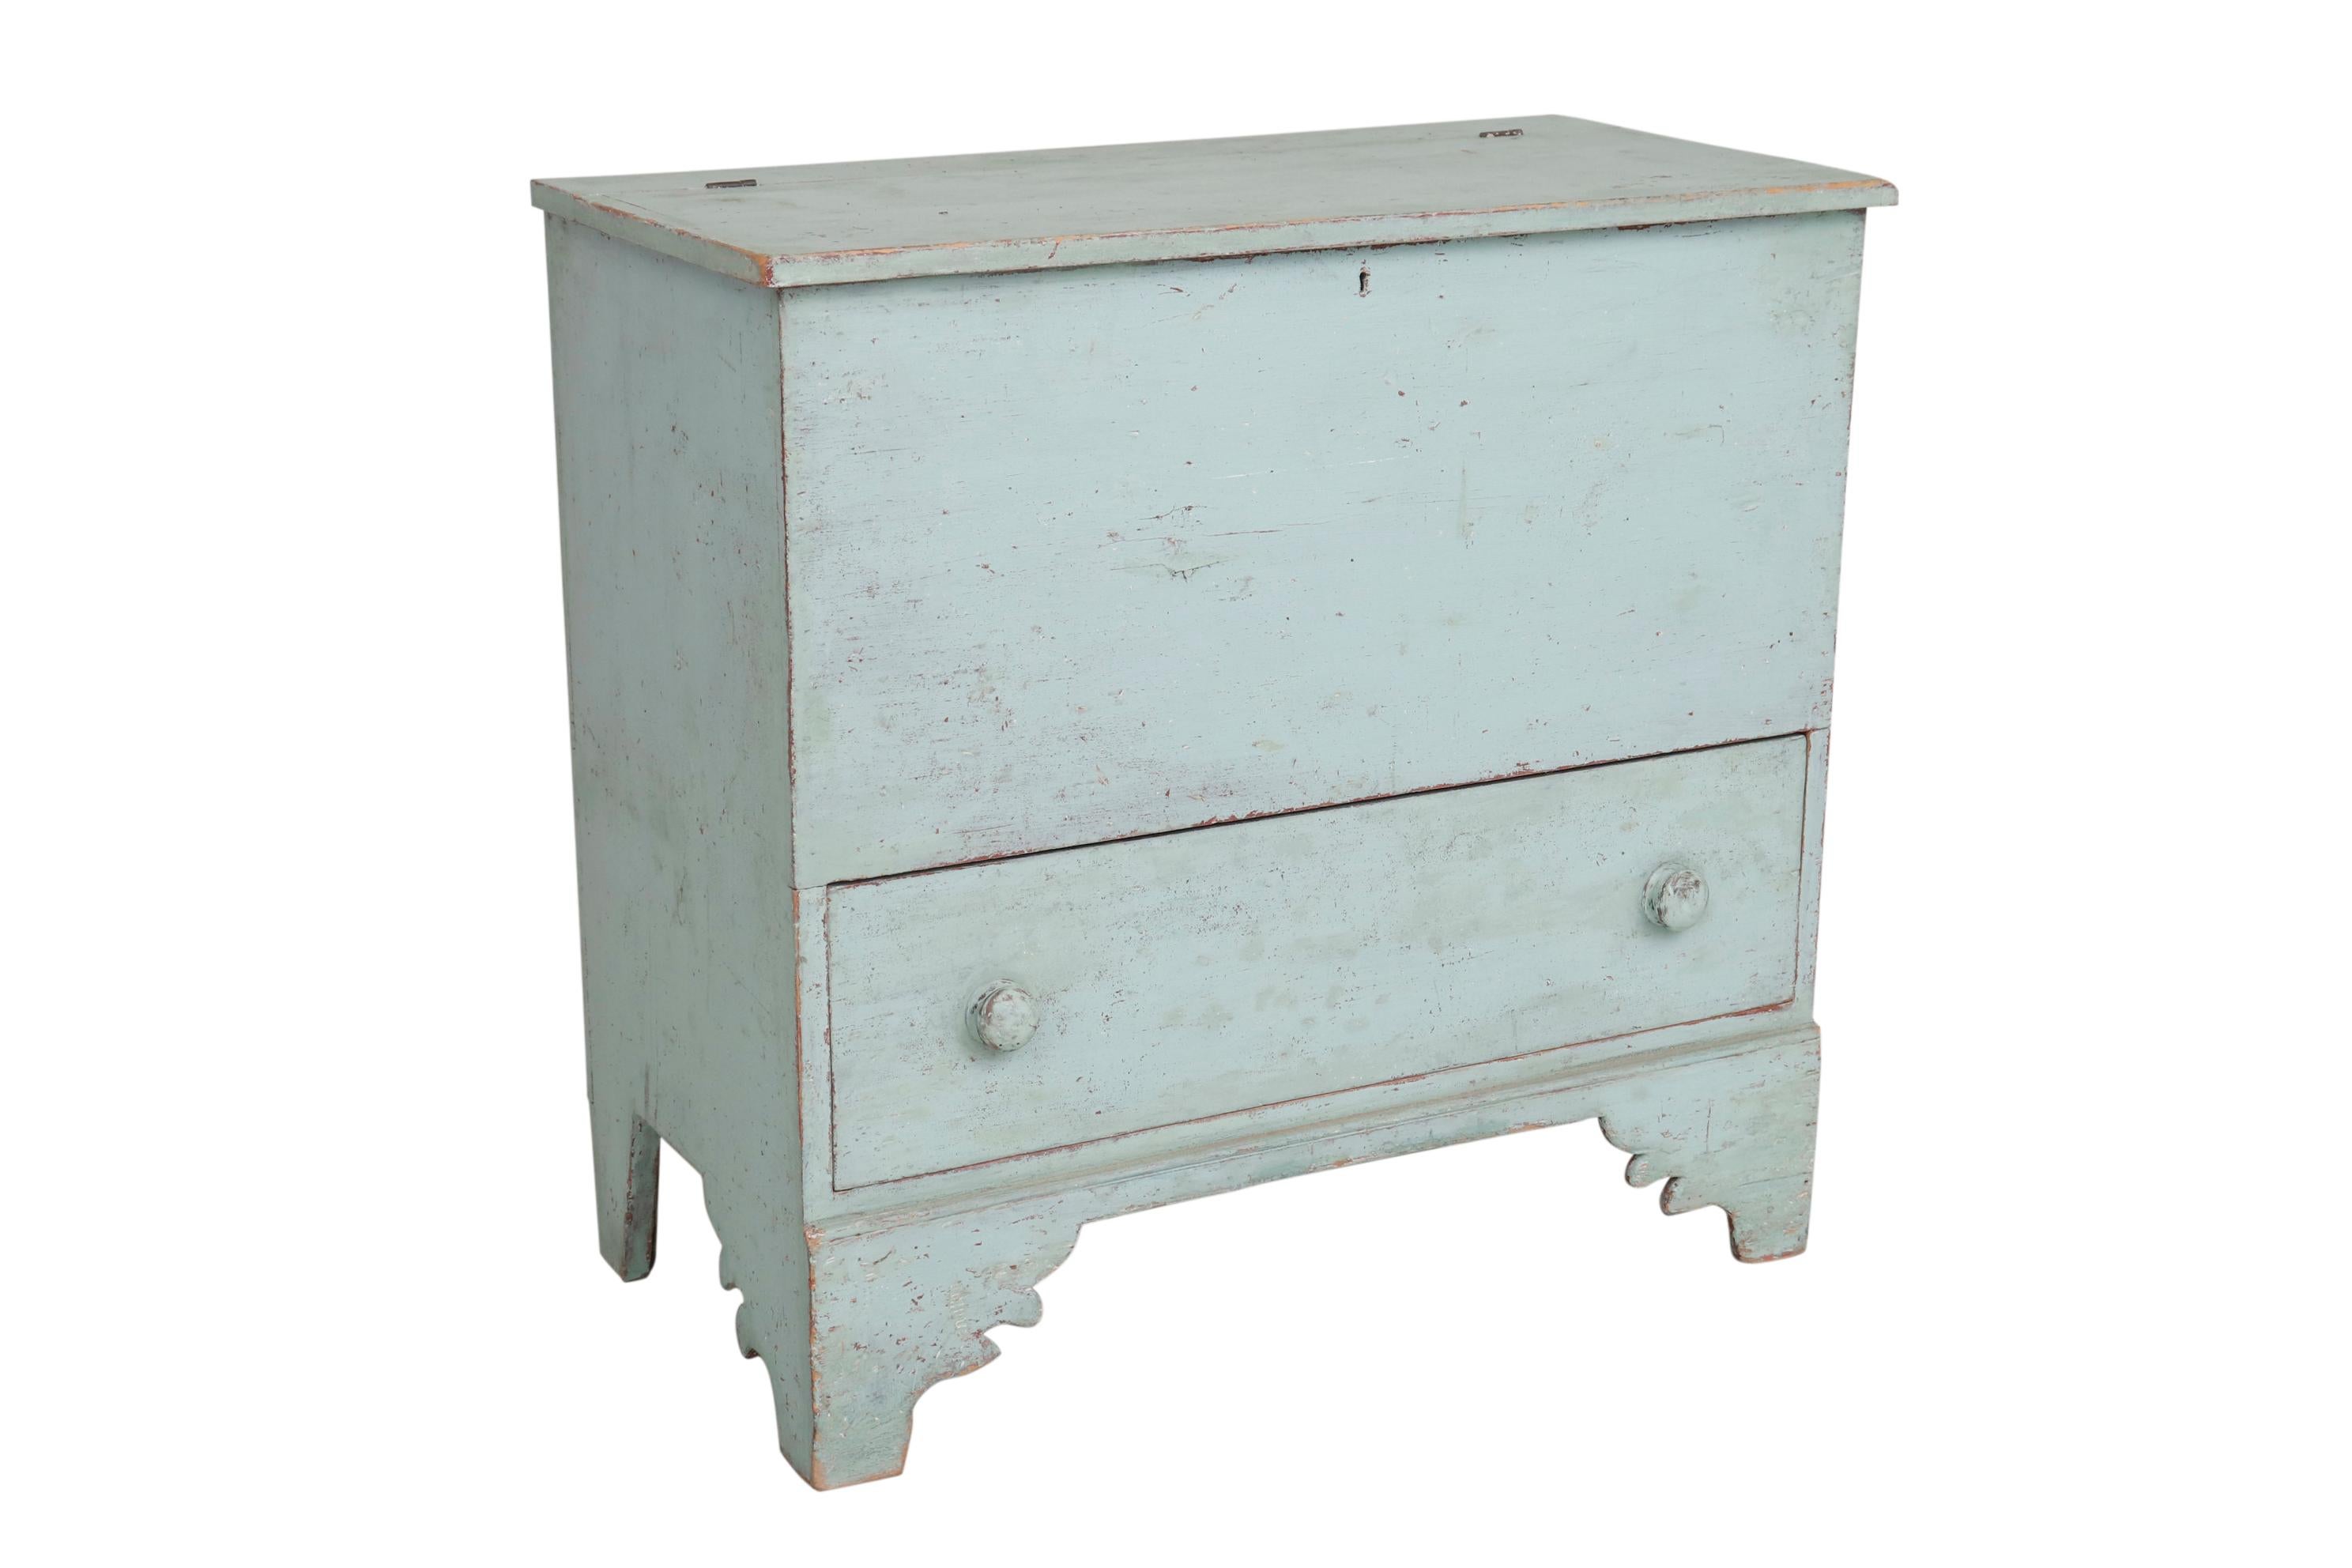 The blanket chest has its original paint and beautiful details in its 